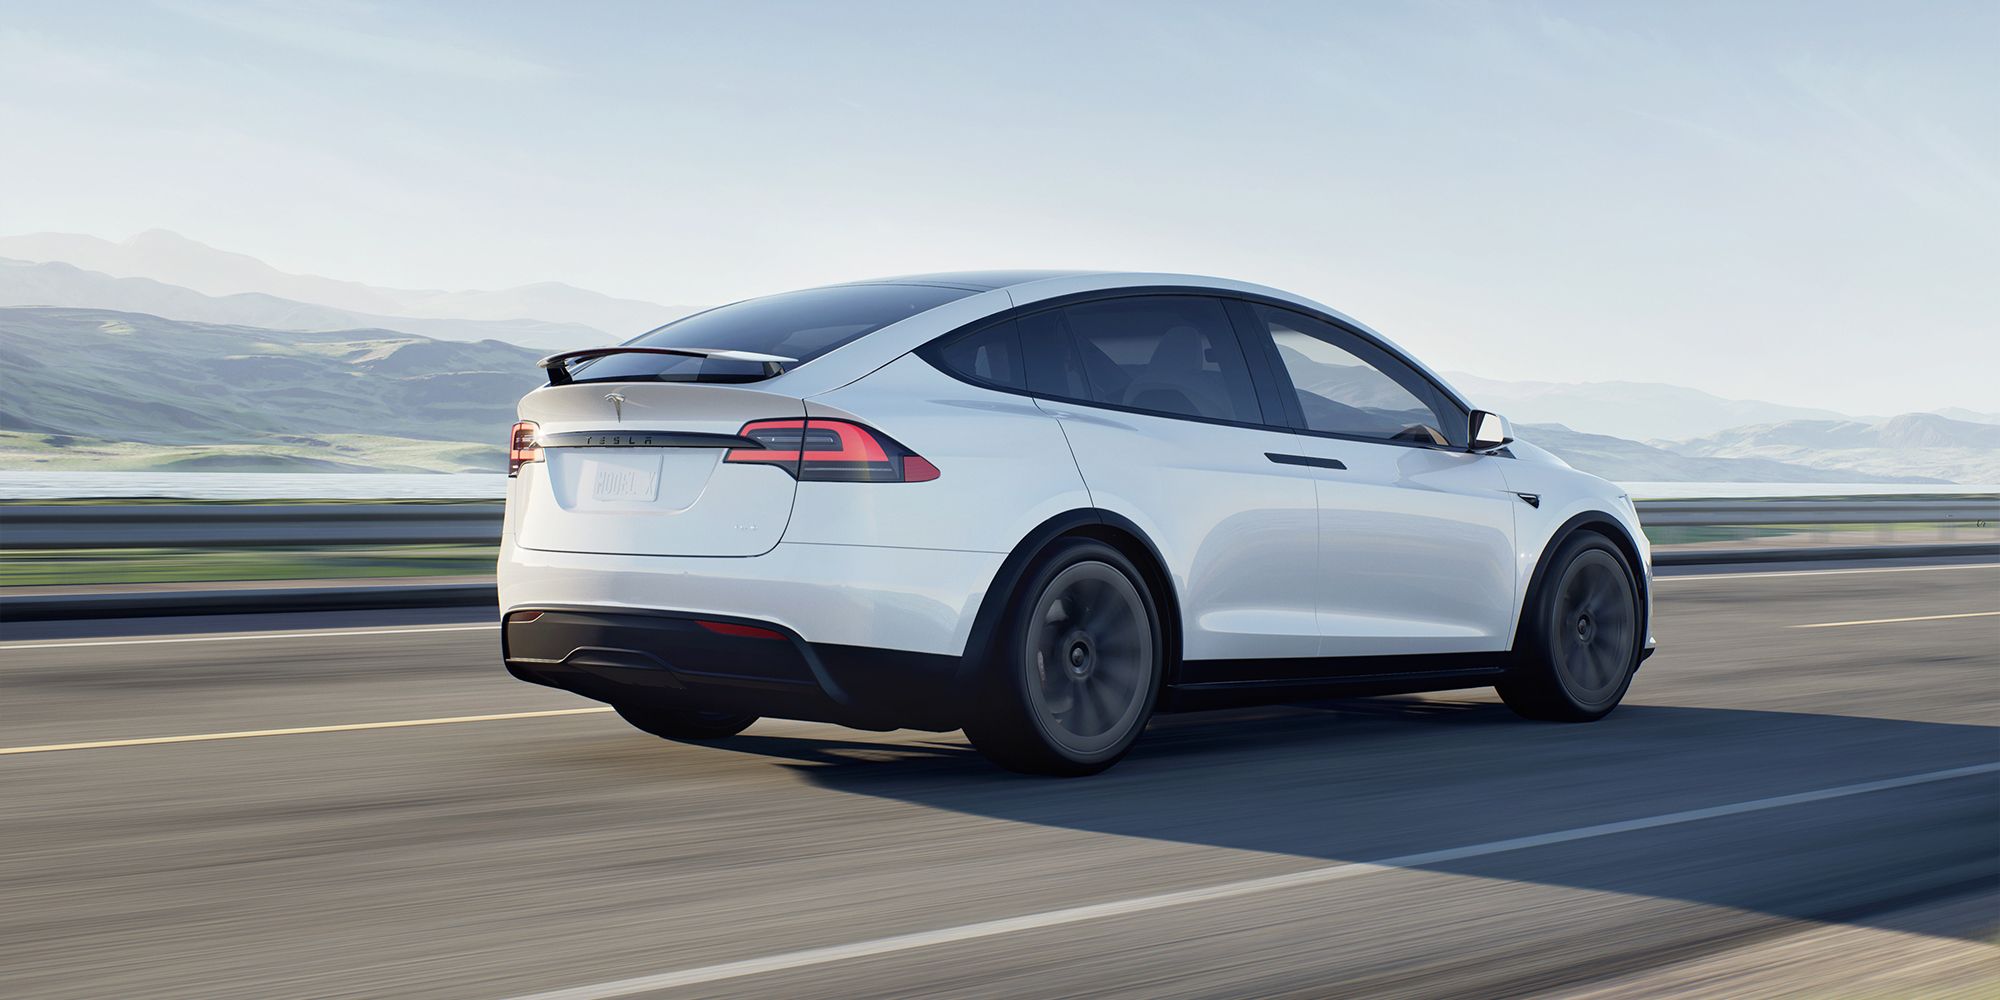 Rear 3/4 view of the Model X in white